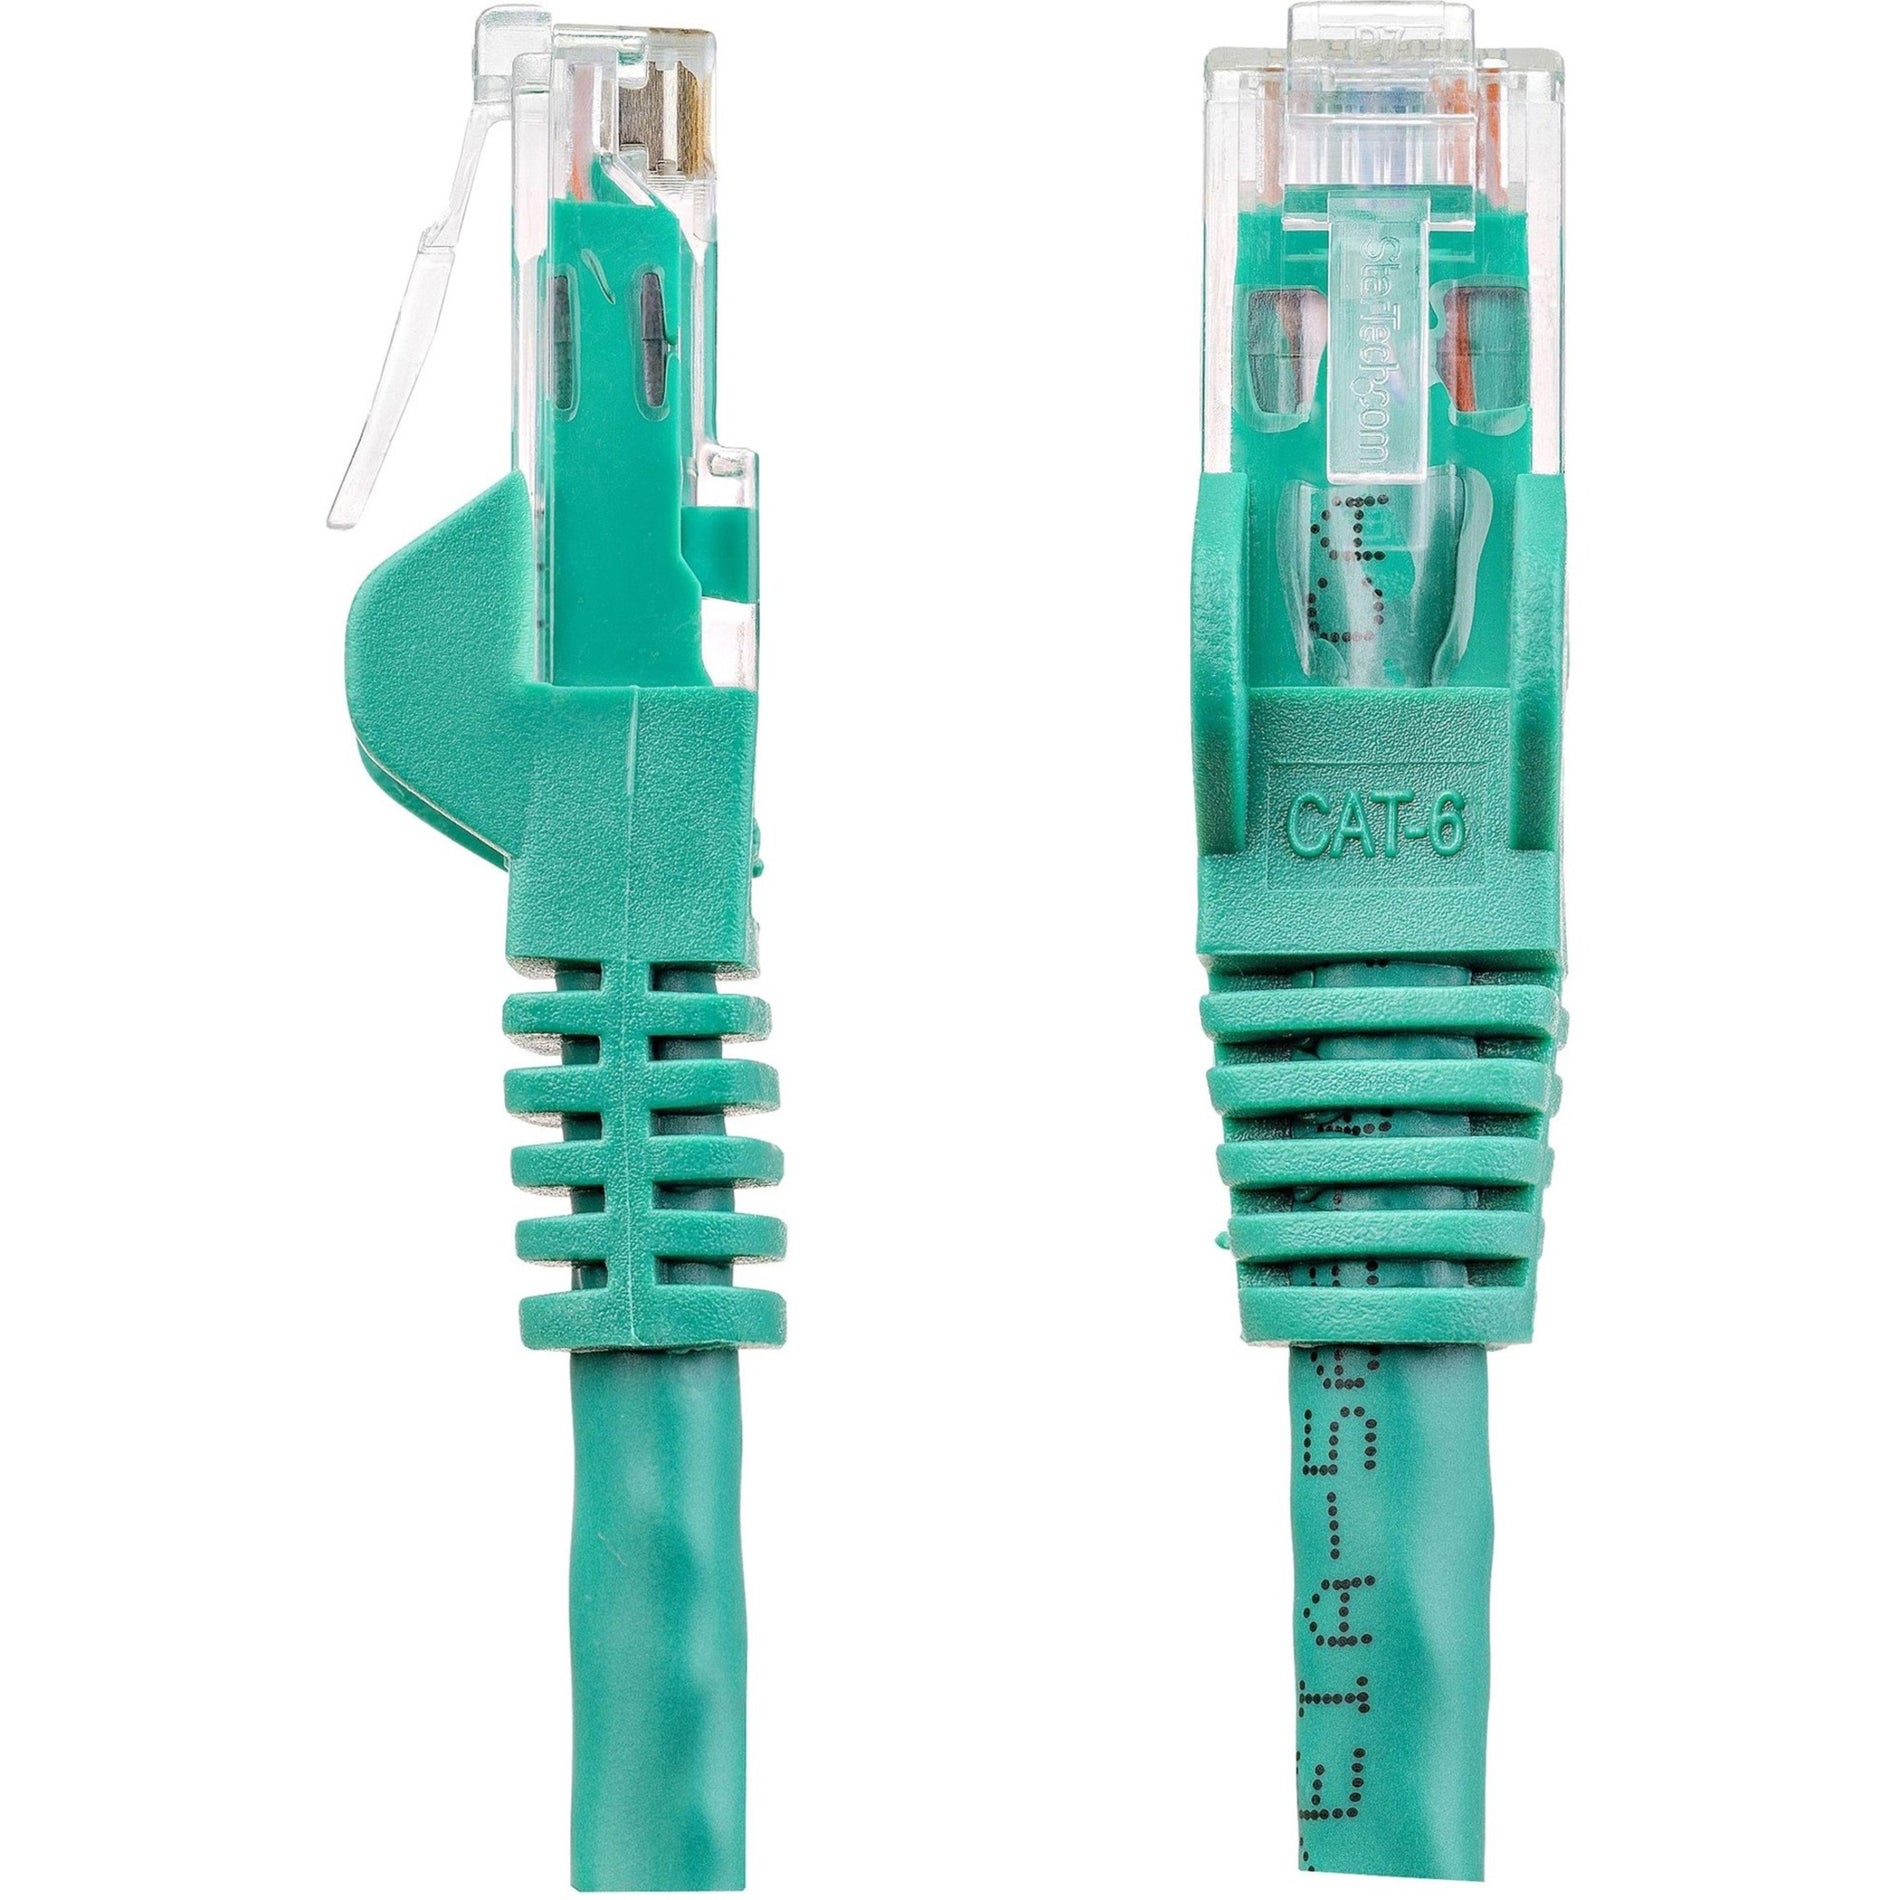 StarTech.com N6PATCH20GN Cat. 6 Network Cable, 20ft Green Ethernet Cable, Snagless RJ45 Connectors